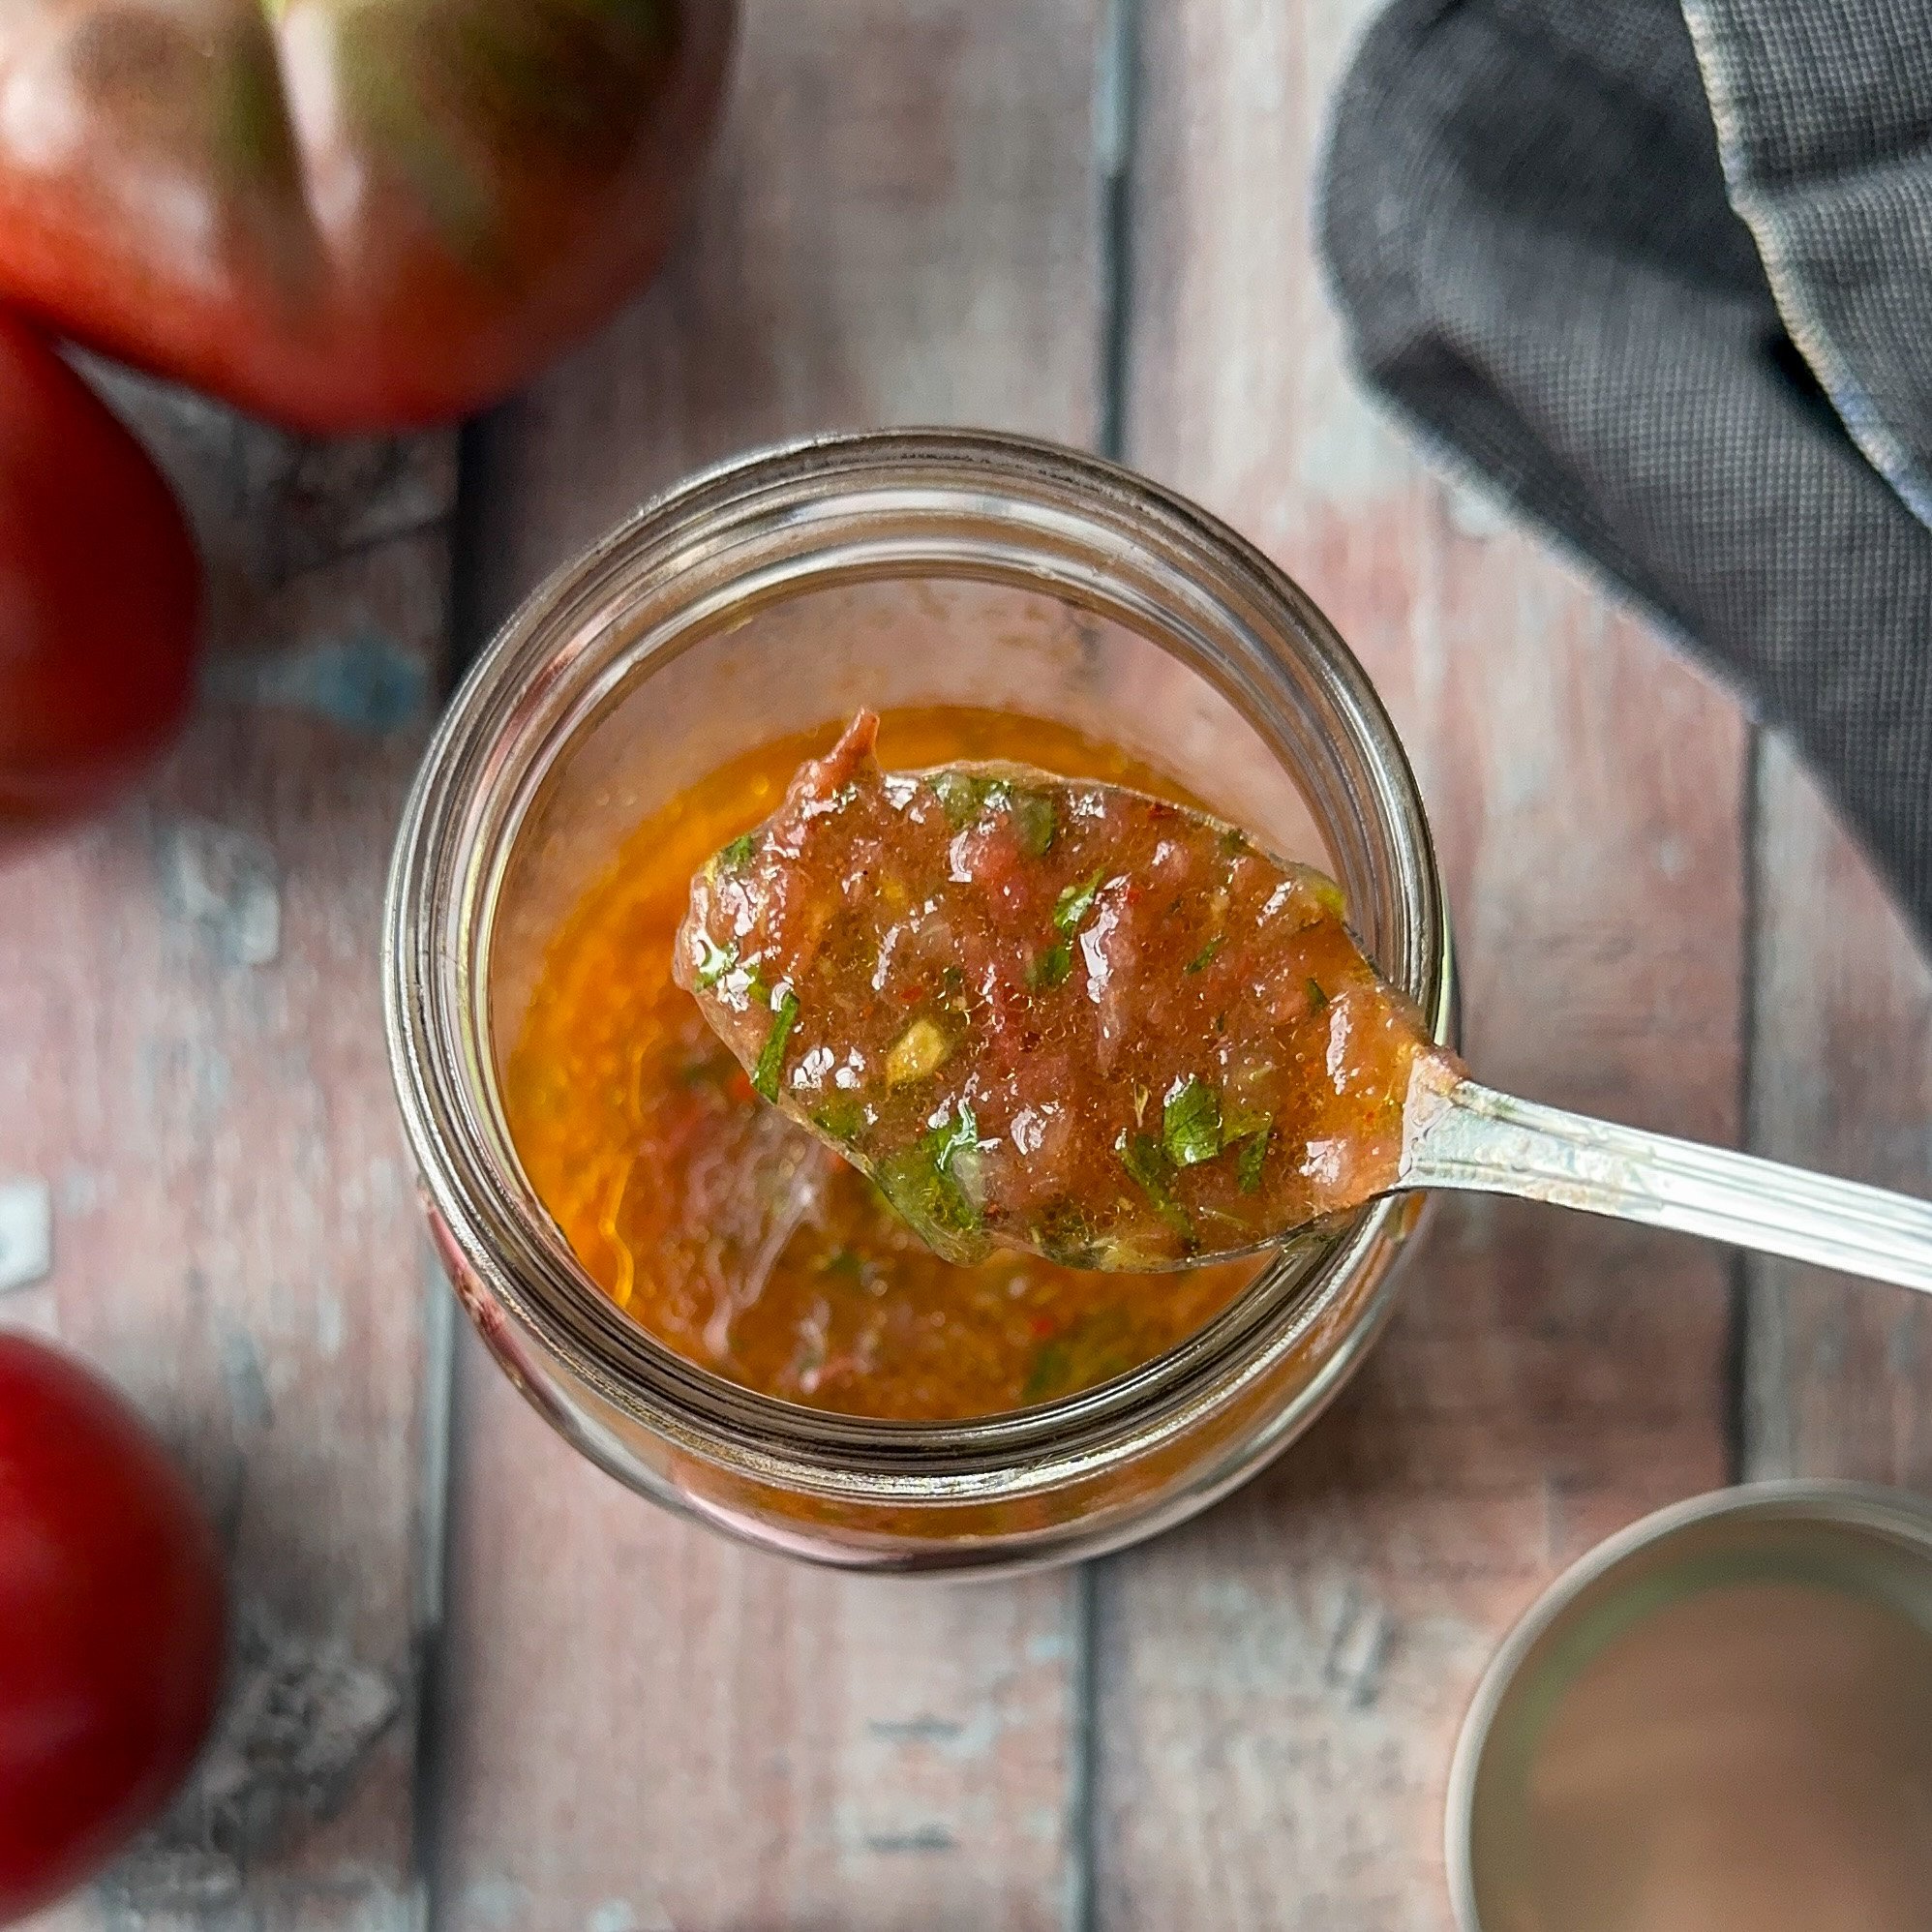 Homemade Ketchup with fresh tomatoes - Living Smart And Healthy